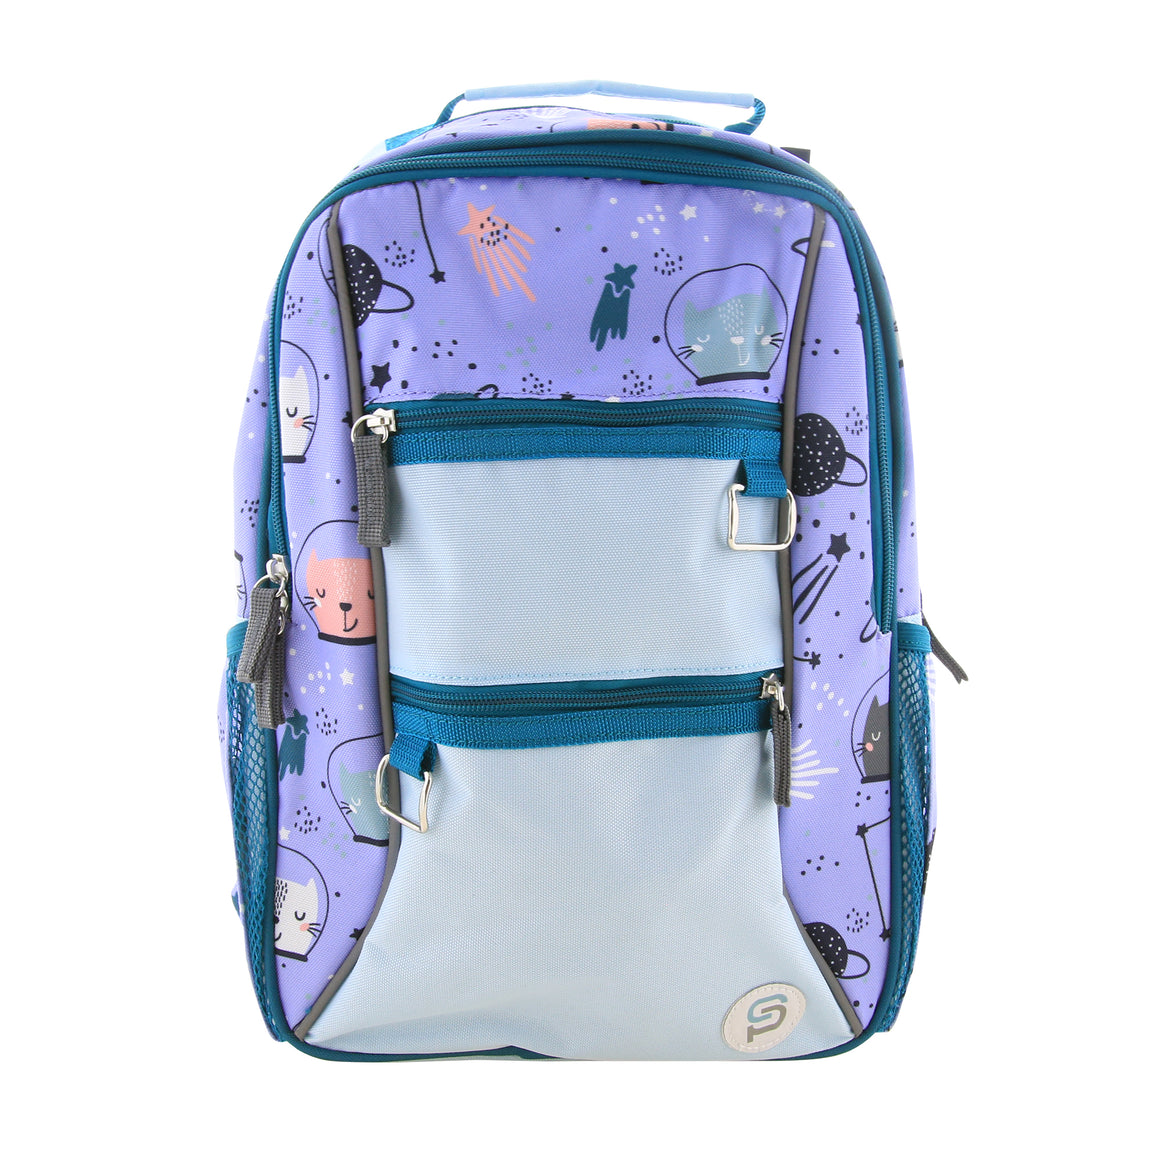 Sydney Paige x BAZIC 16" VALENCIA Space Cats Backpack